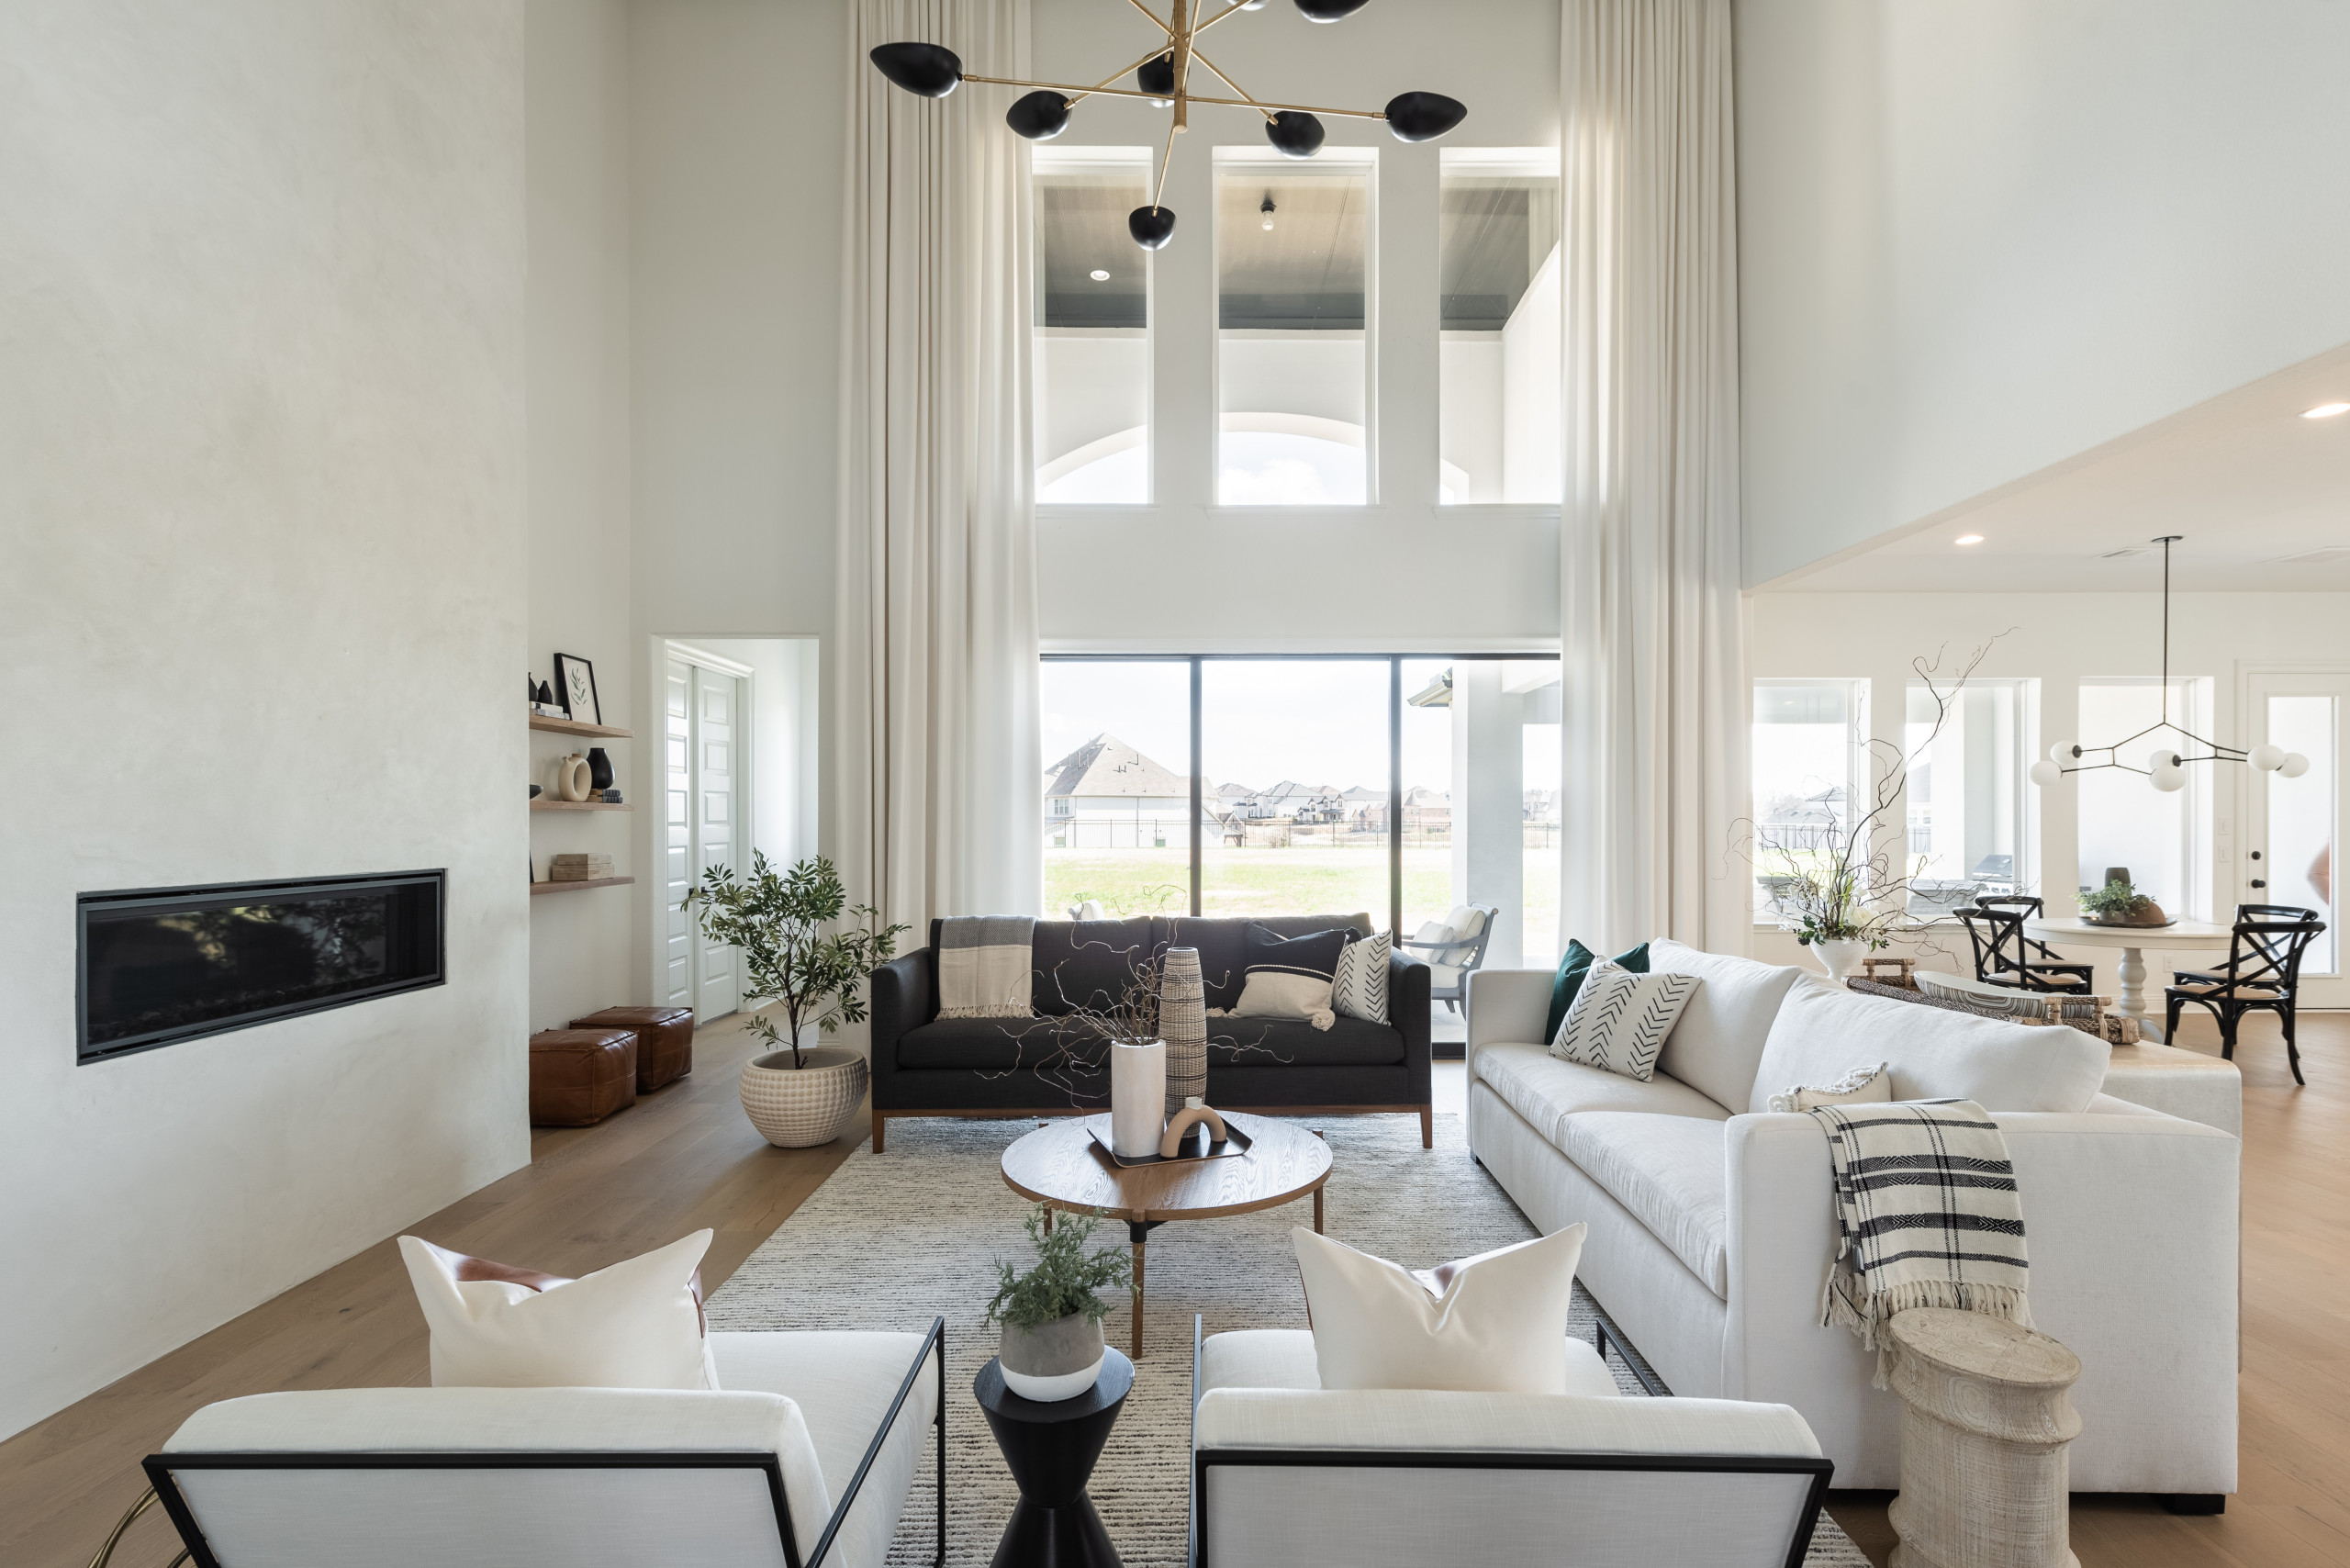 Flower Mound Transitional Modern Transitional Living Room By Urbanology Designs Houzz